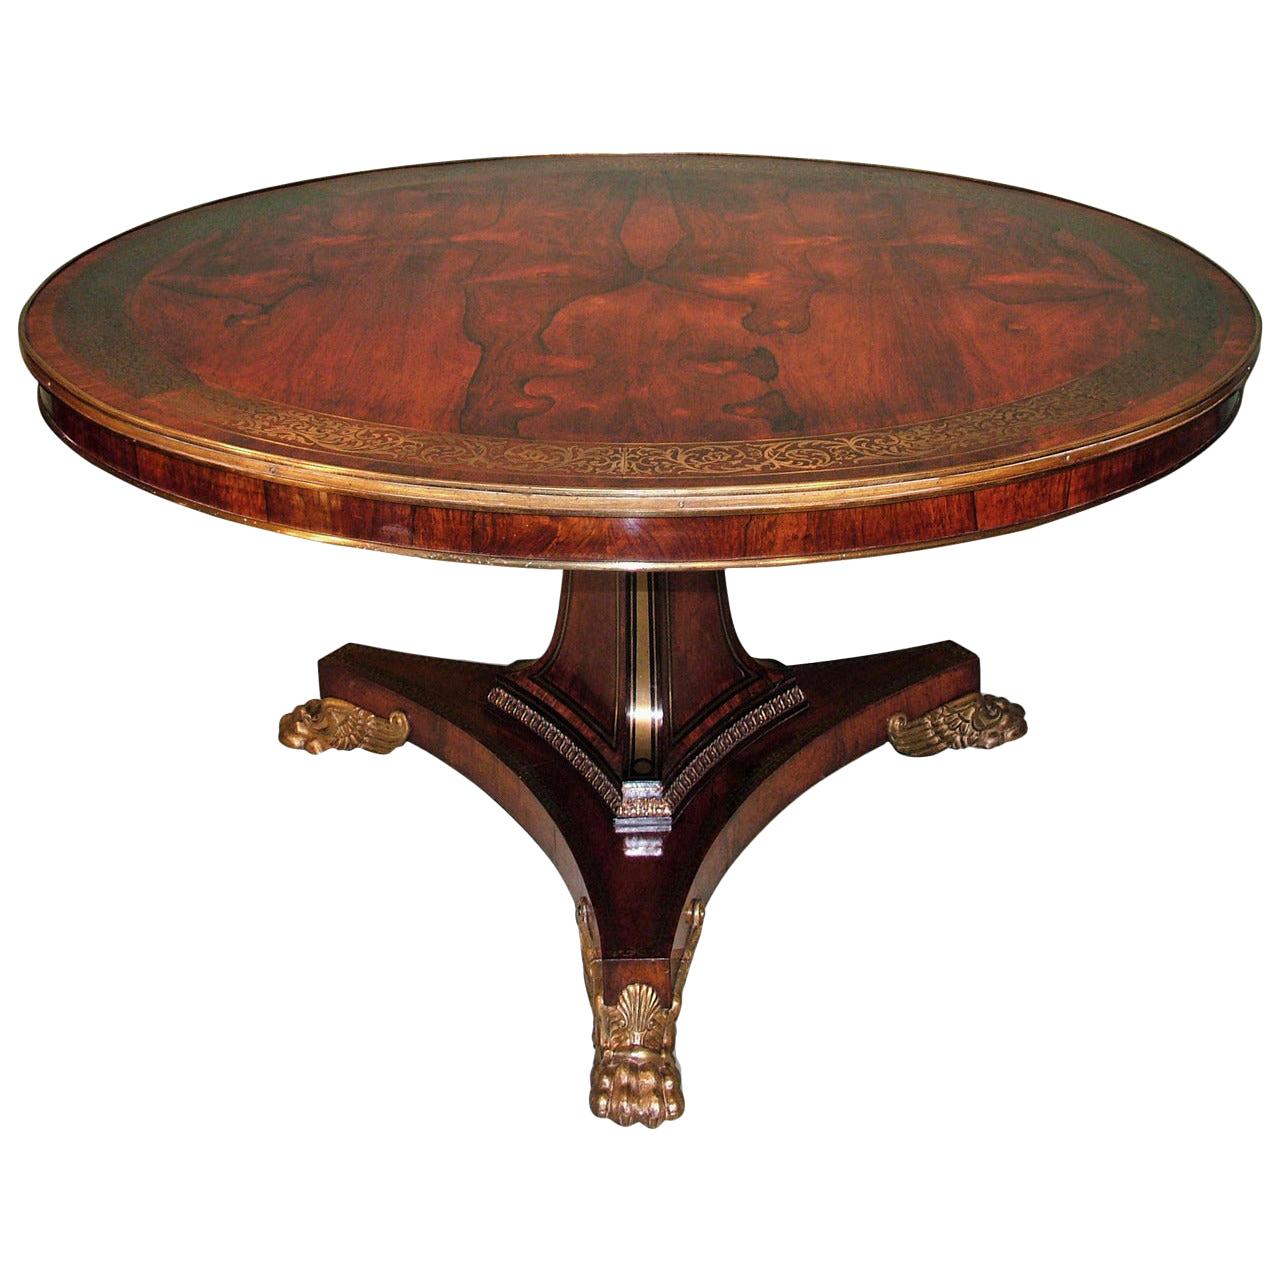 Early 19th Century Regency Rosewood Centre Table